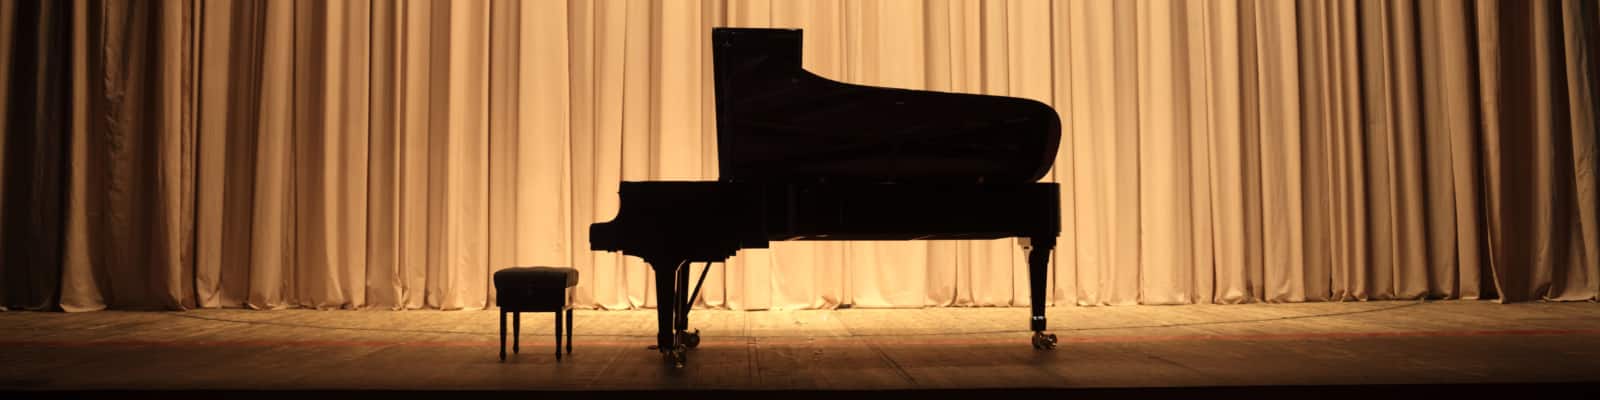 Grand piano at concert stage with brown curtain